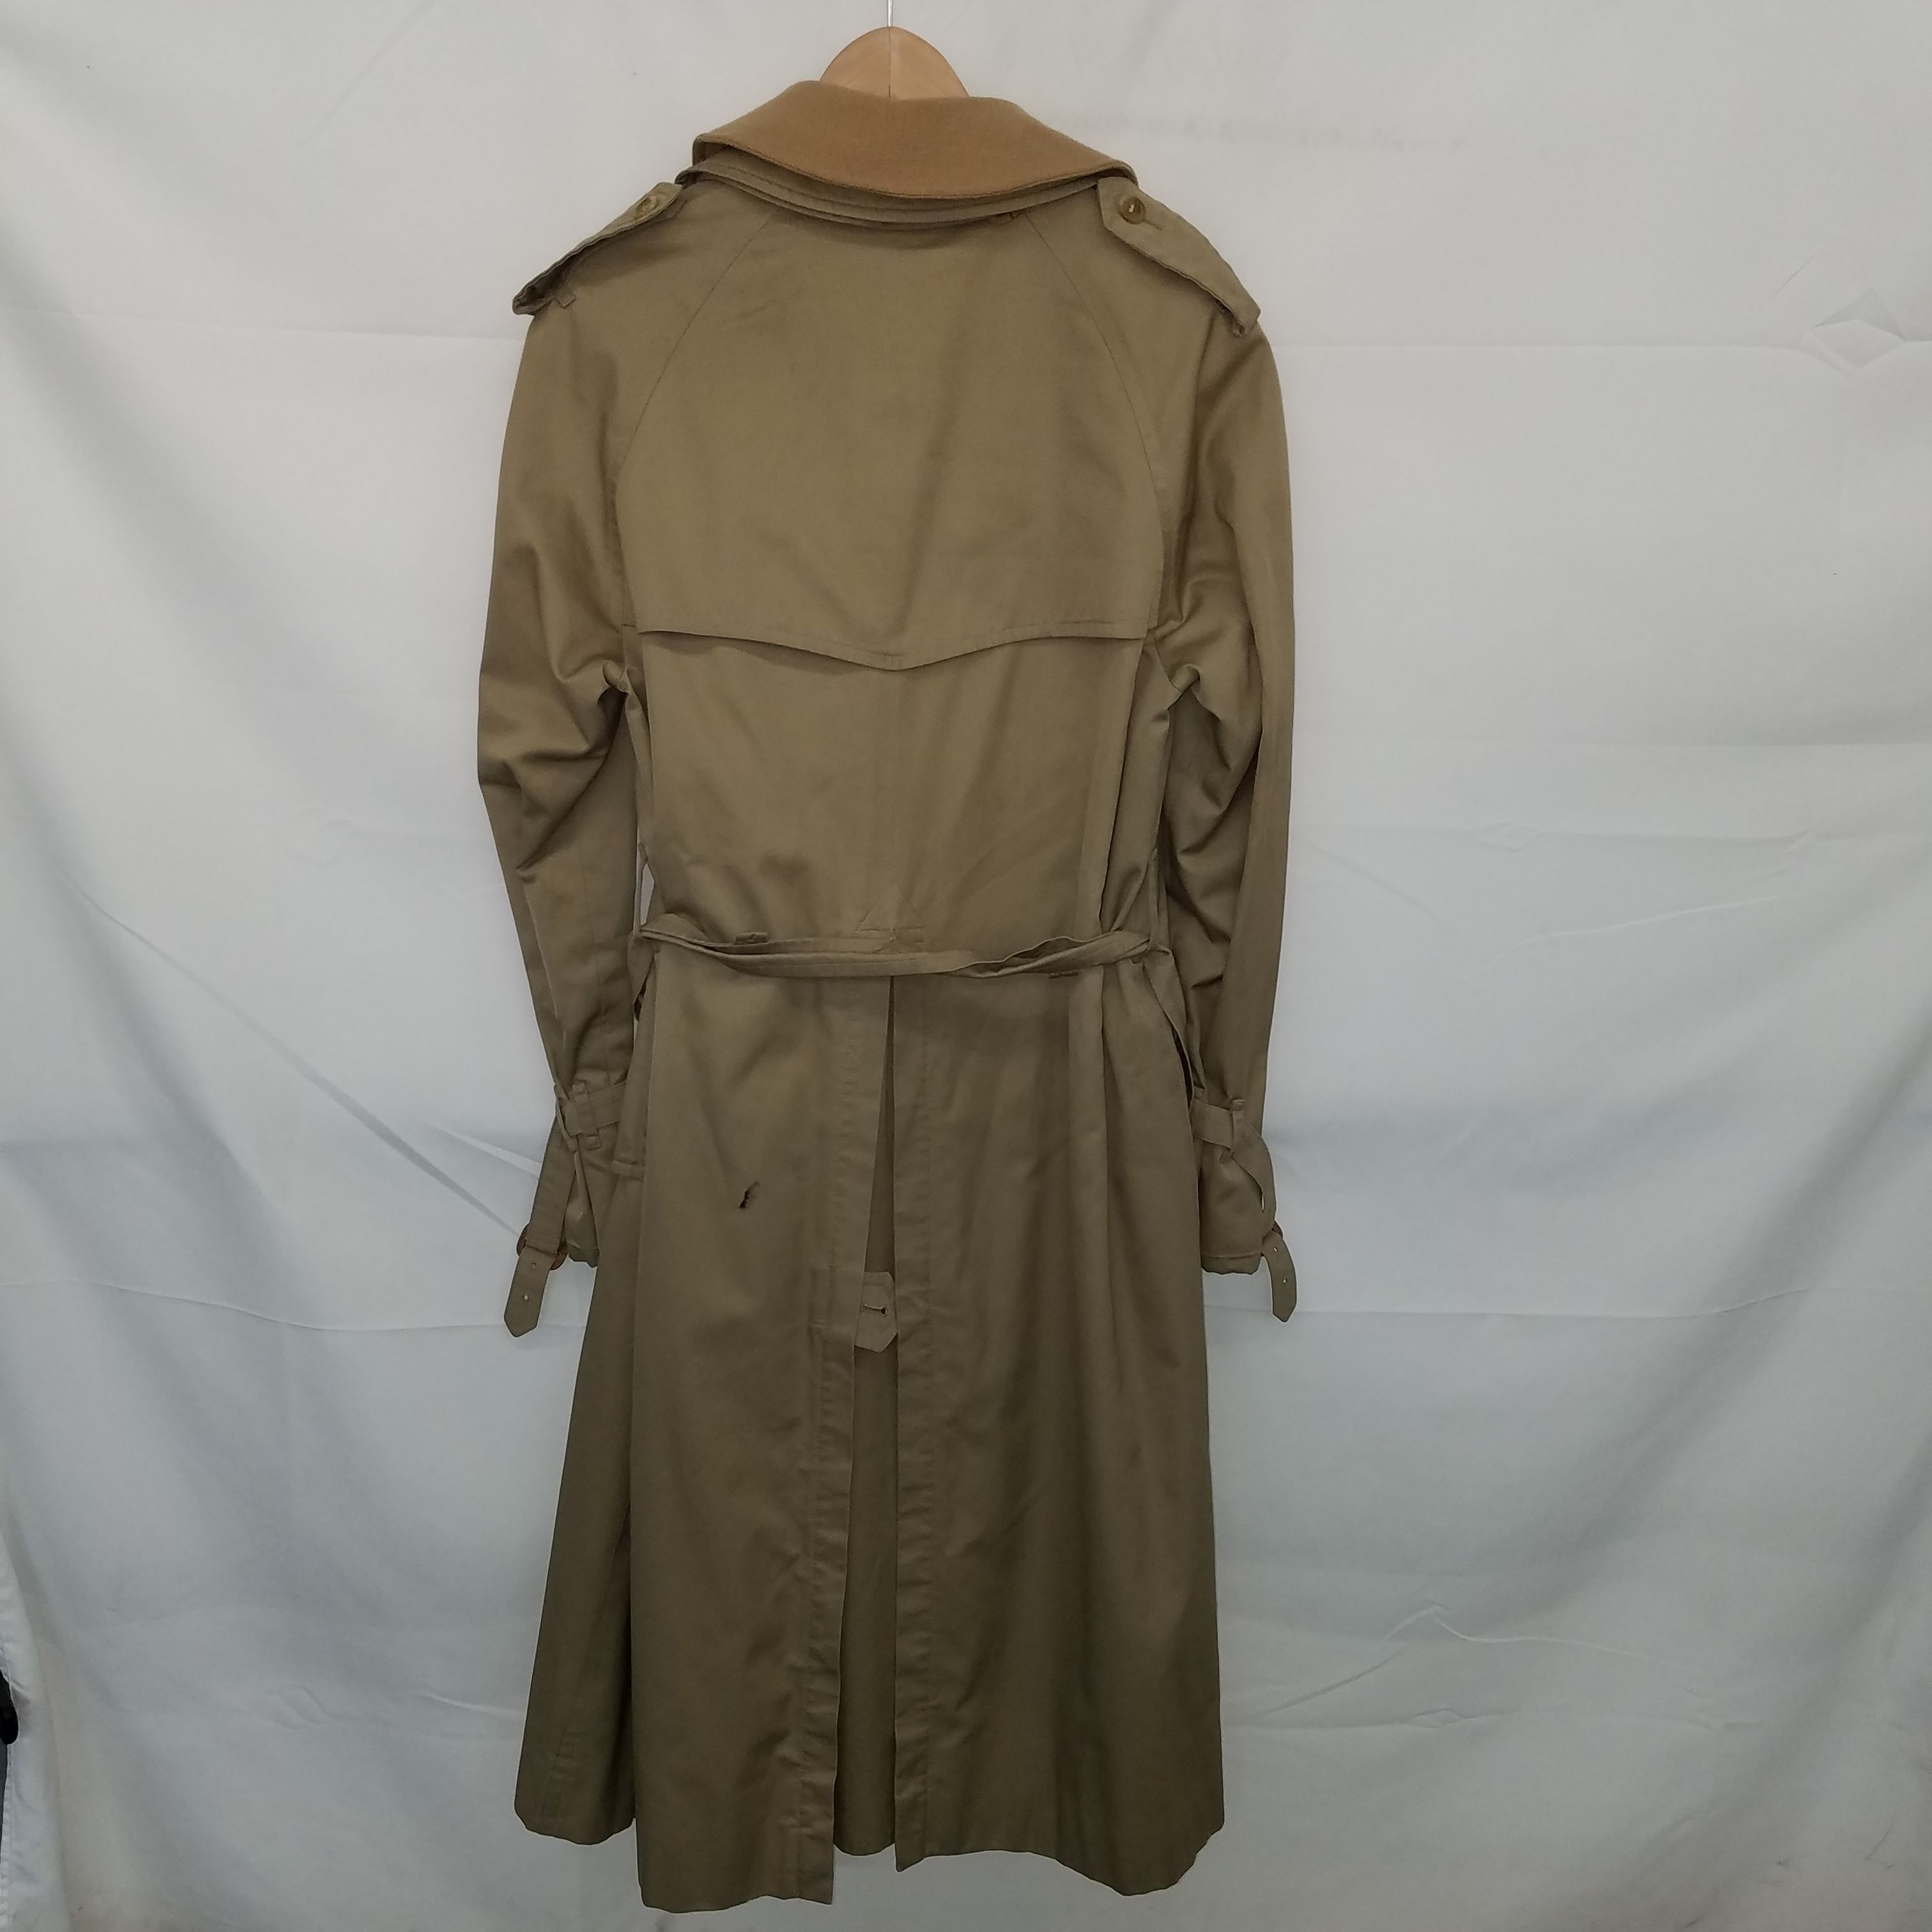 Buy The Authenticated Vtg Mens Burberry Khaki Wool Neck Trench Coat Sz 38r Goodwillfinds